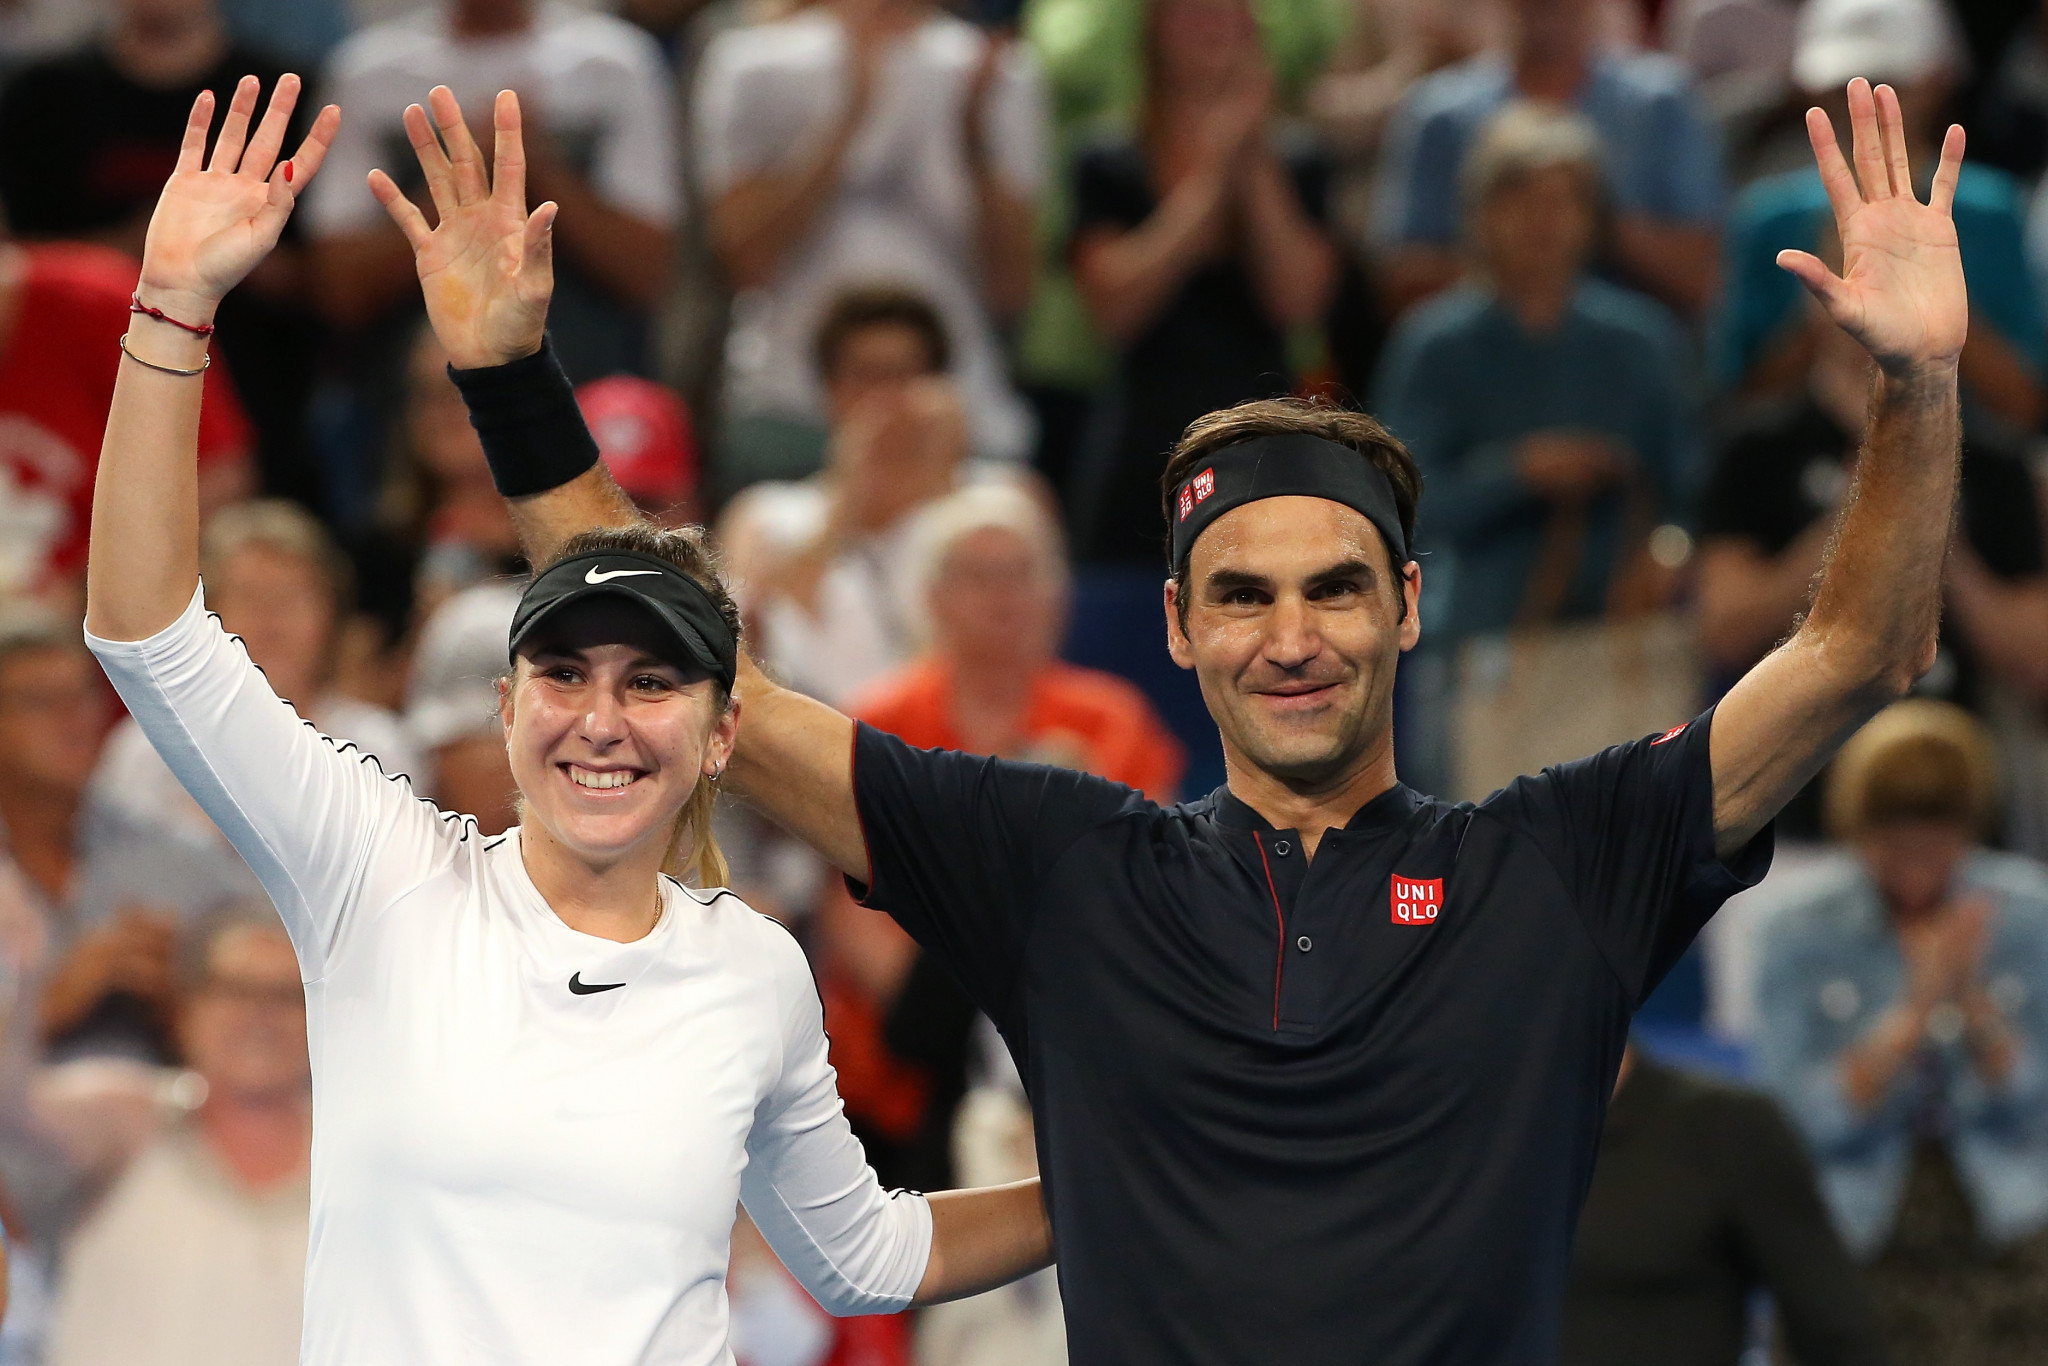 Swiss tennis player Belinda Bencic is hopeful she will still play in the Olympic mixed doubles event at Tokyo 2020 with Roger Federer ©Getty Images